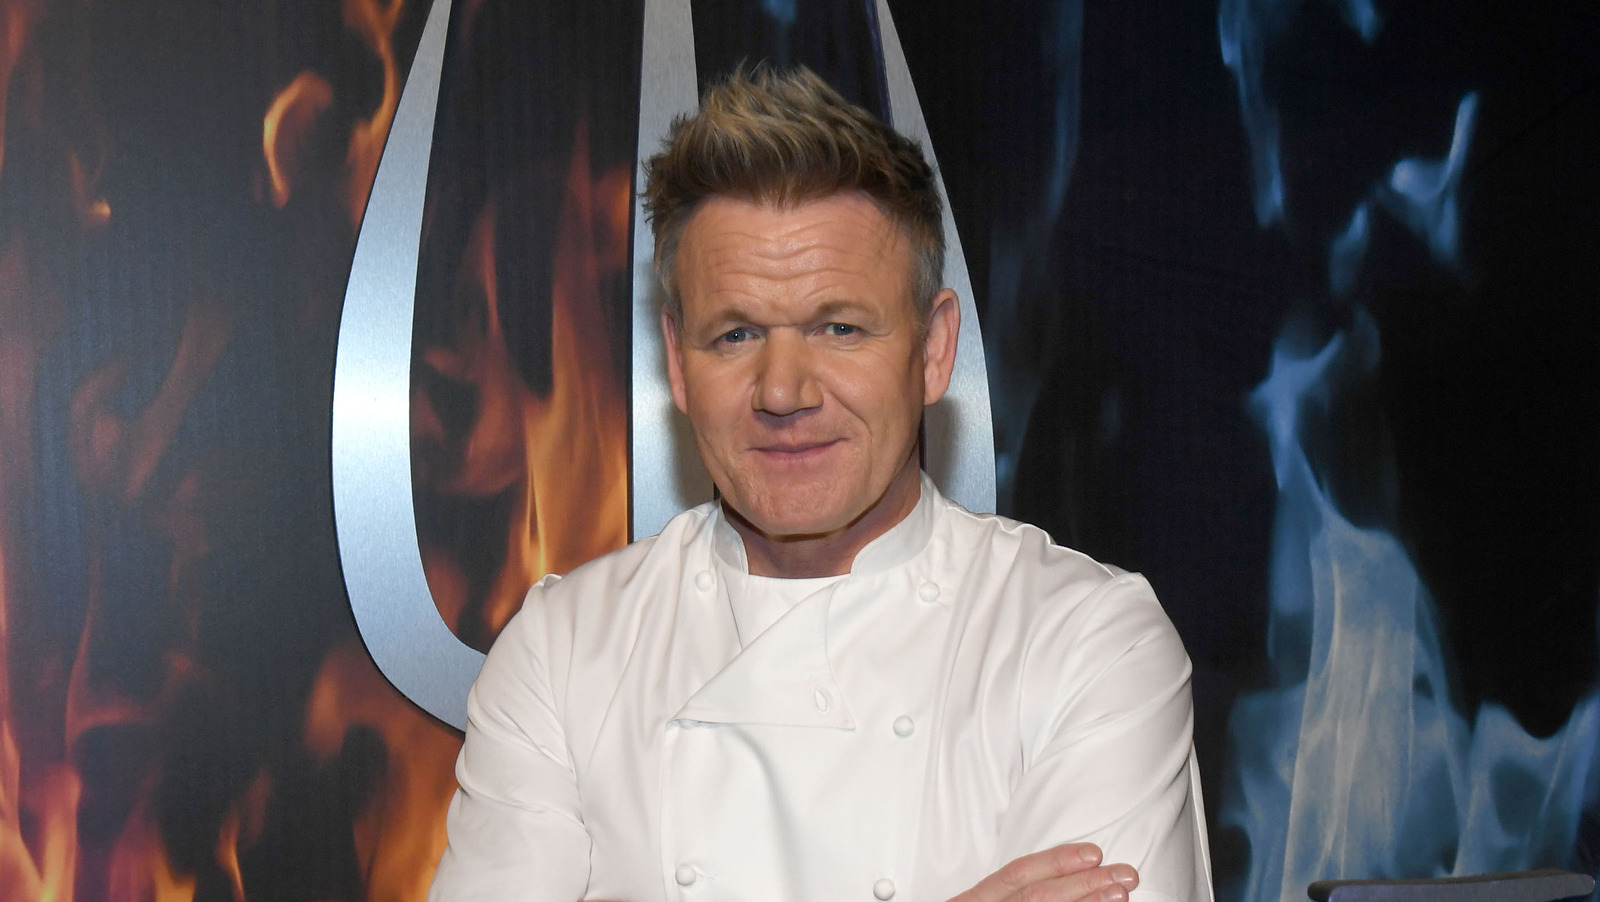 20 facts you didn't know about Gordon Ramsay - Dequte Restuarant